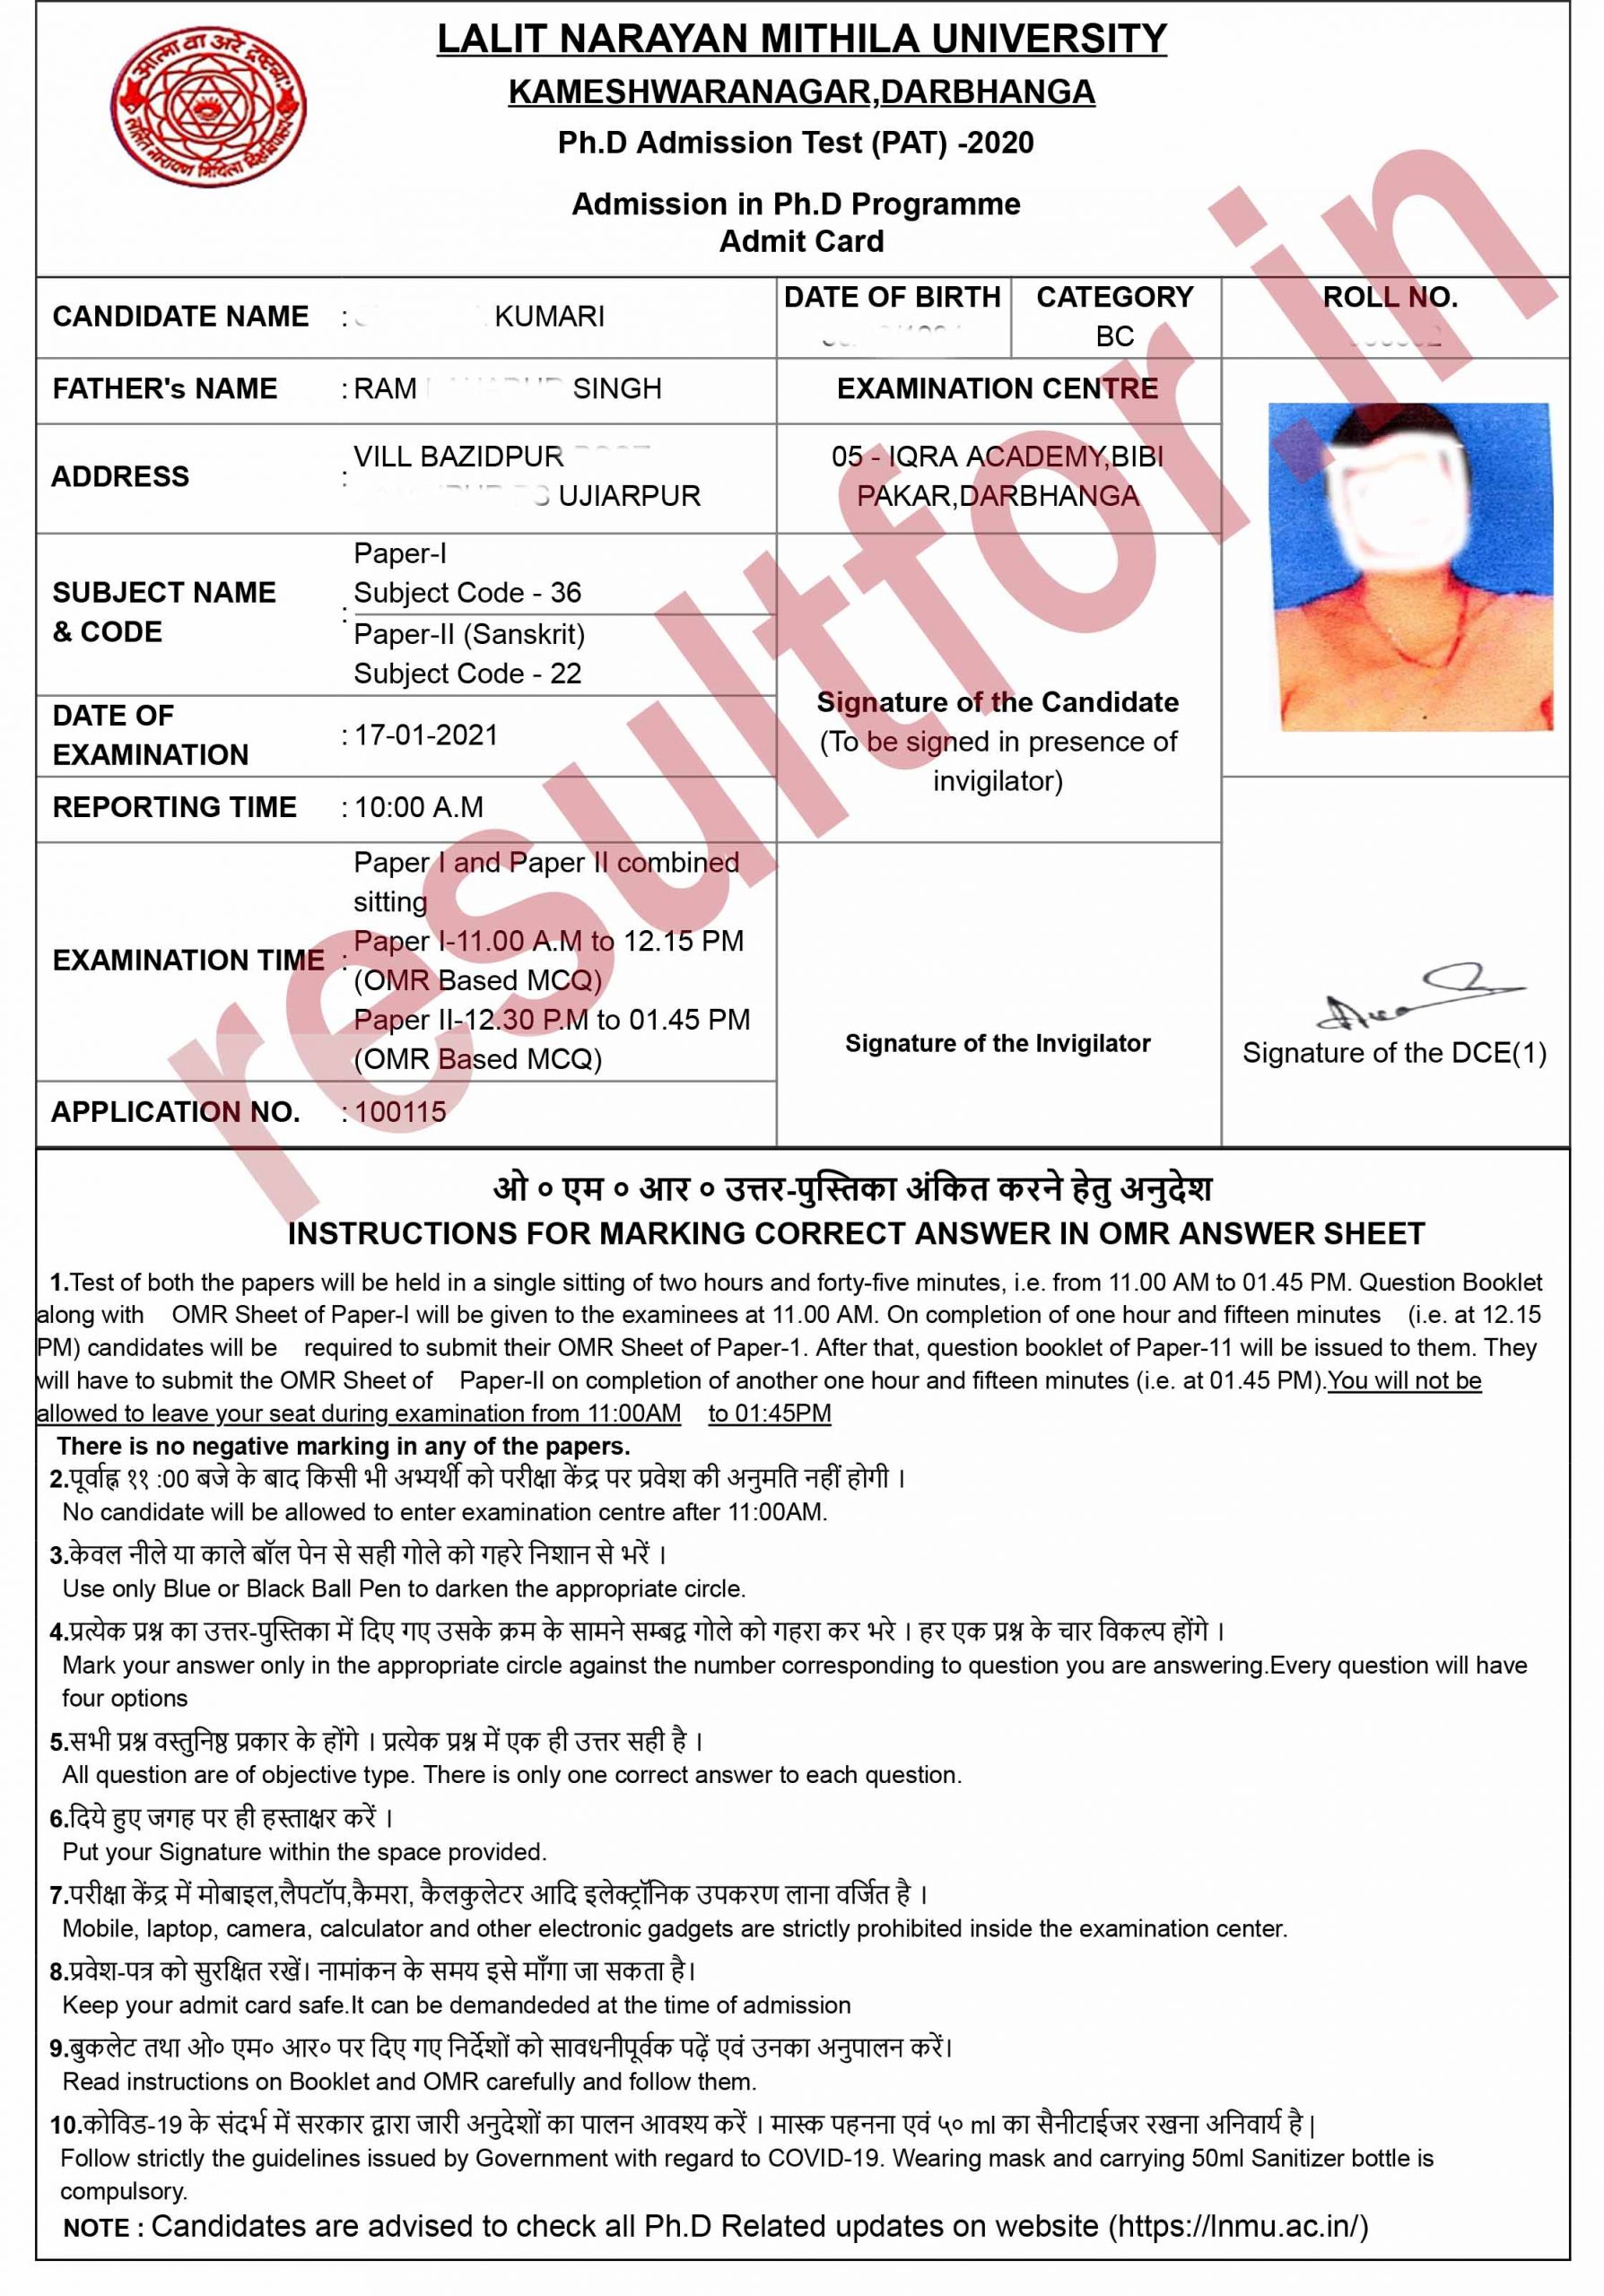 phd admit card download